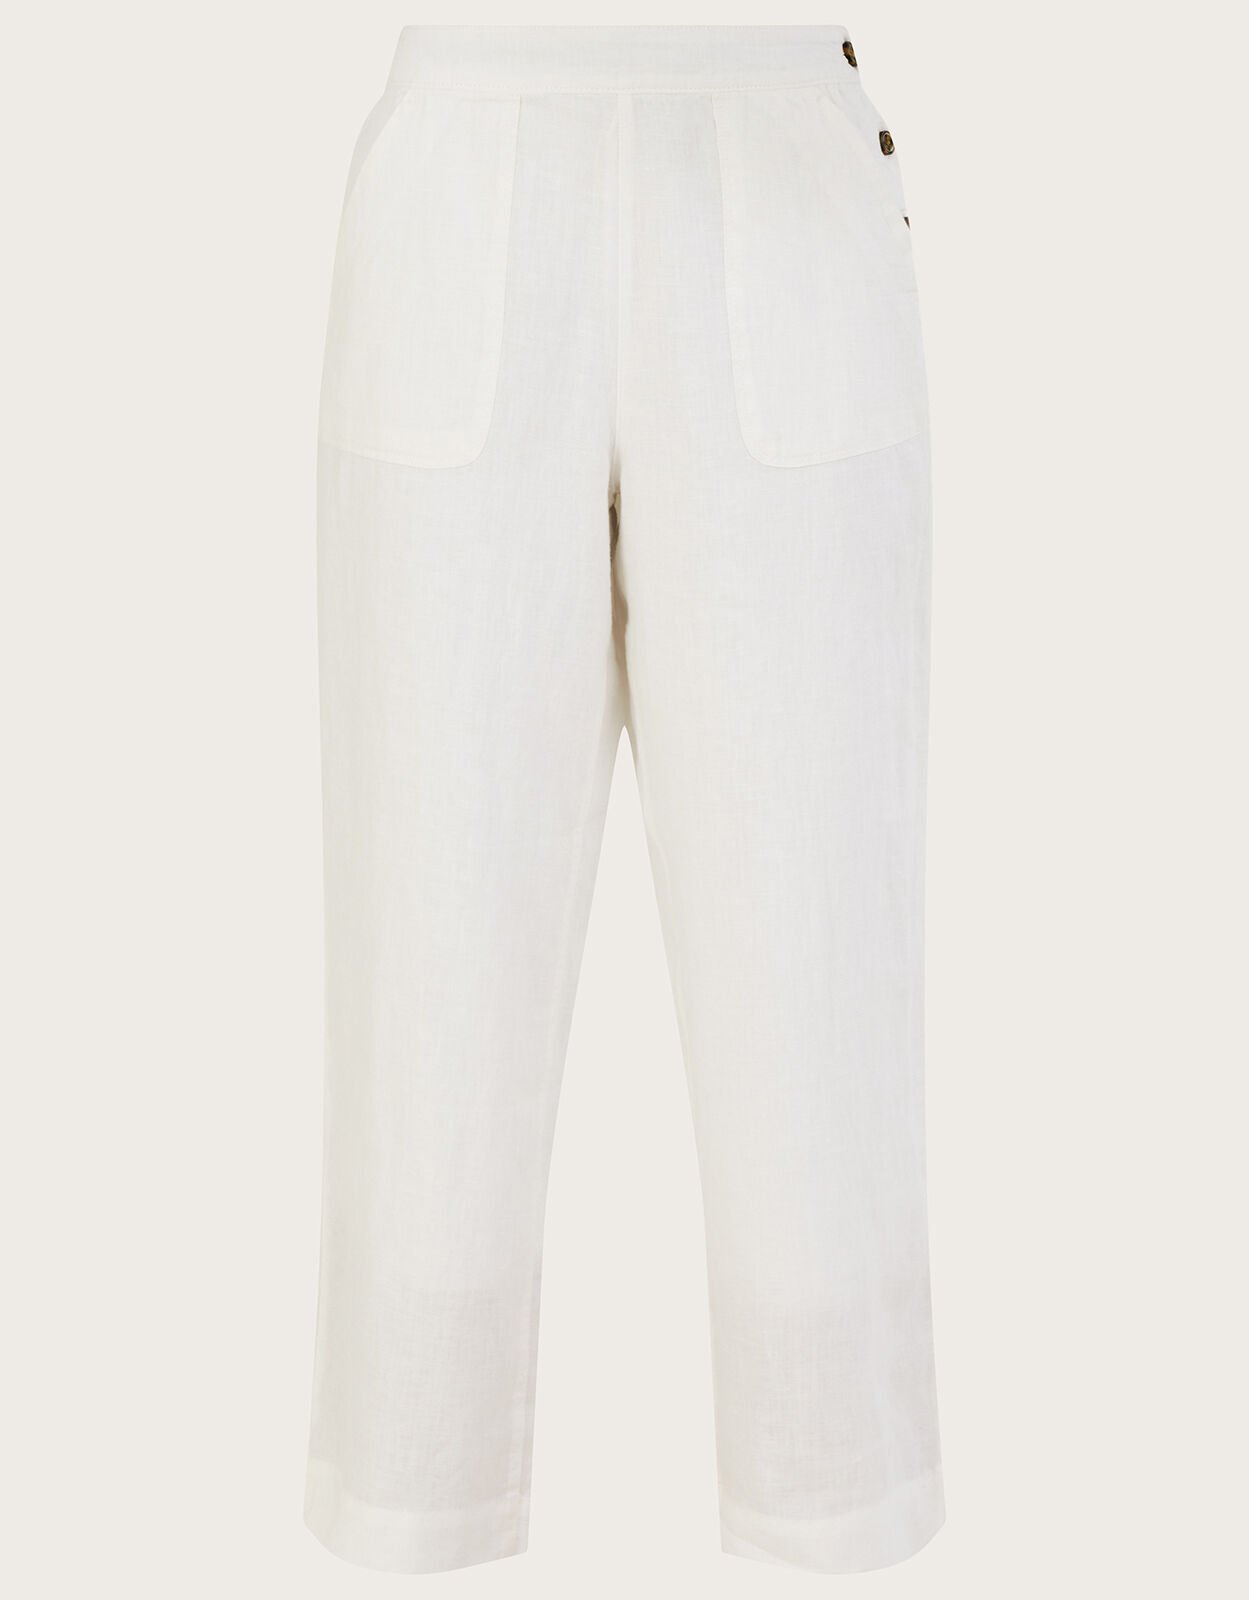 Buy Monsoon Natural Jenny Shorter Length Trousers in Linen Blend from the  Next UK online shop